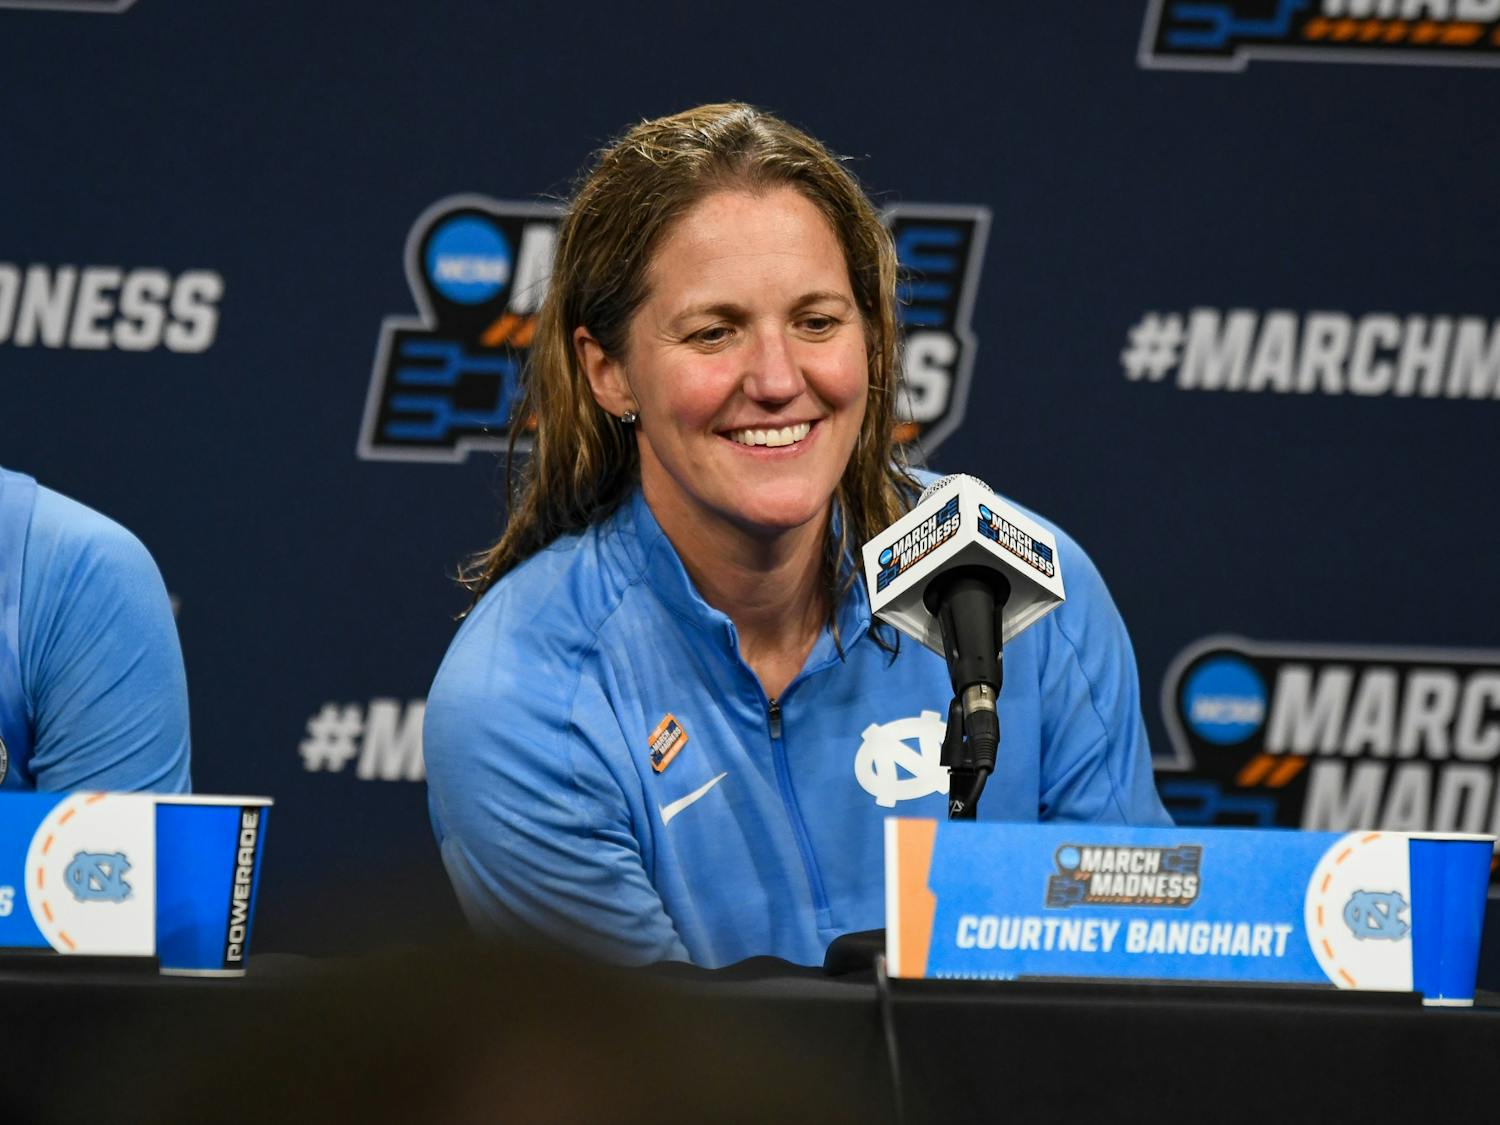 UNC Head Coach Courtney Banghart speaks in a press conference after winning the second round of the NCAA Tournament against University of Arizona in Tucson, Arizona, on Saturday, March 21, 2022. Carolina won 63-45 to proceed to Sweet 16 round.